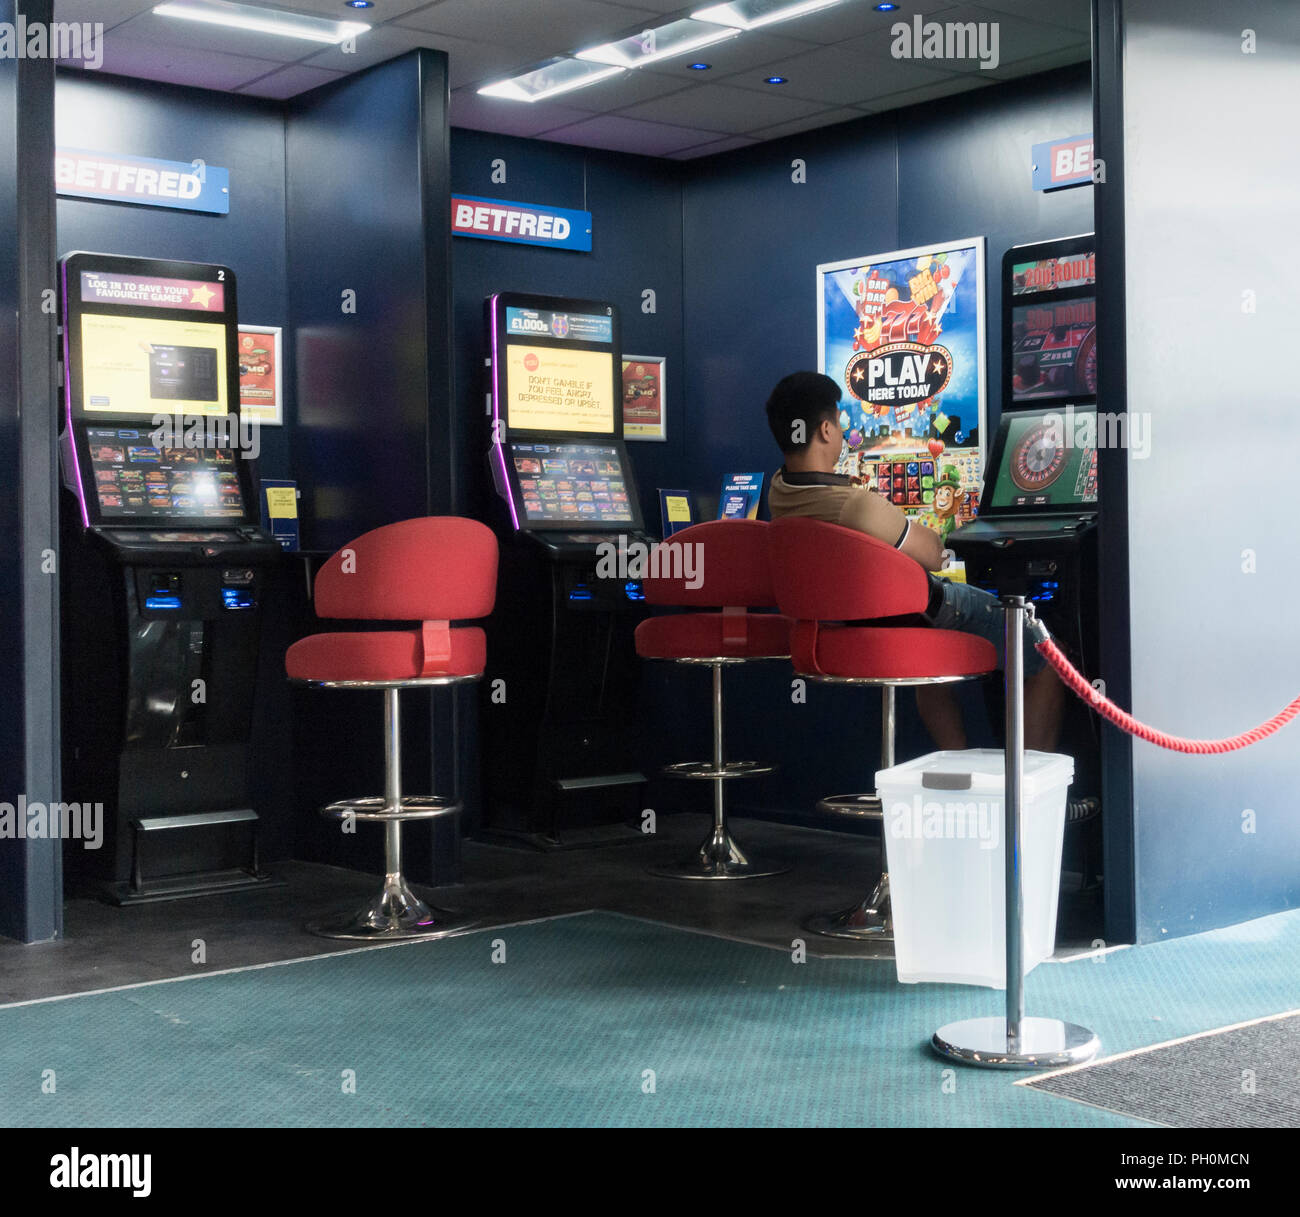 Fixed Odds betting terminali (FOBT) in Betfred betting office. Regno Unito Foto Stock